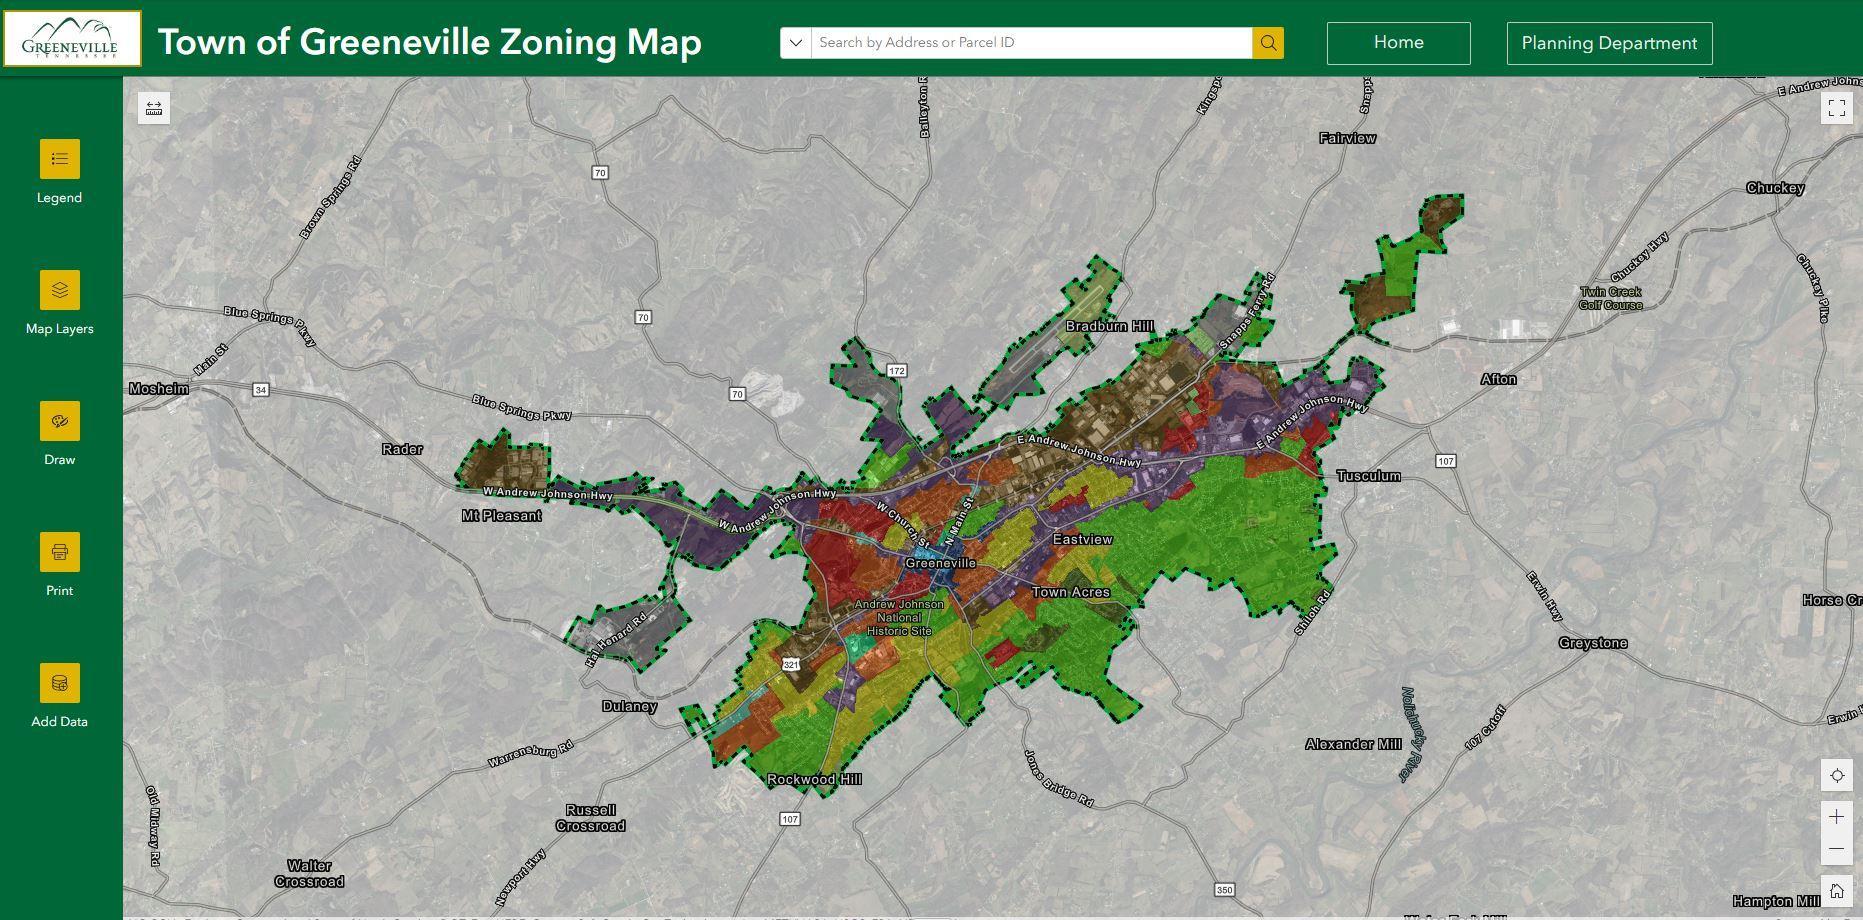 Town Zoning Web Application